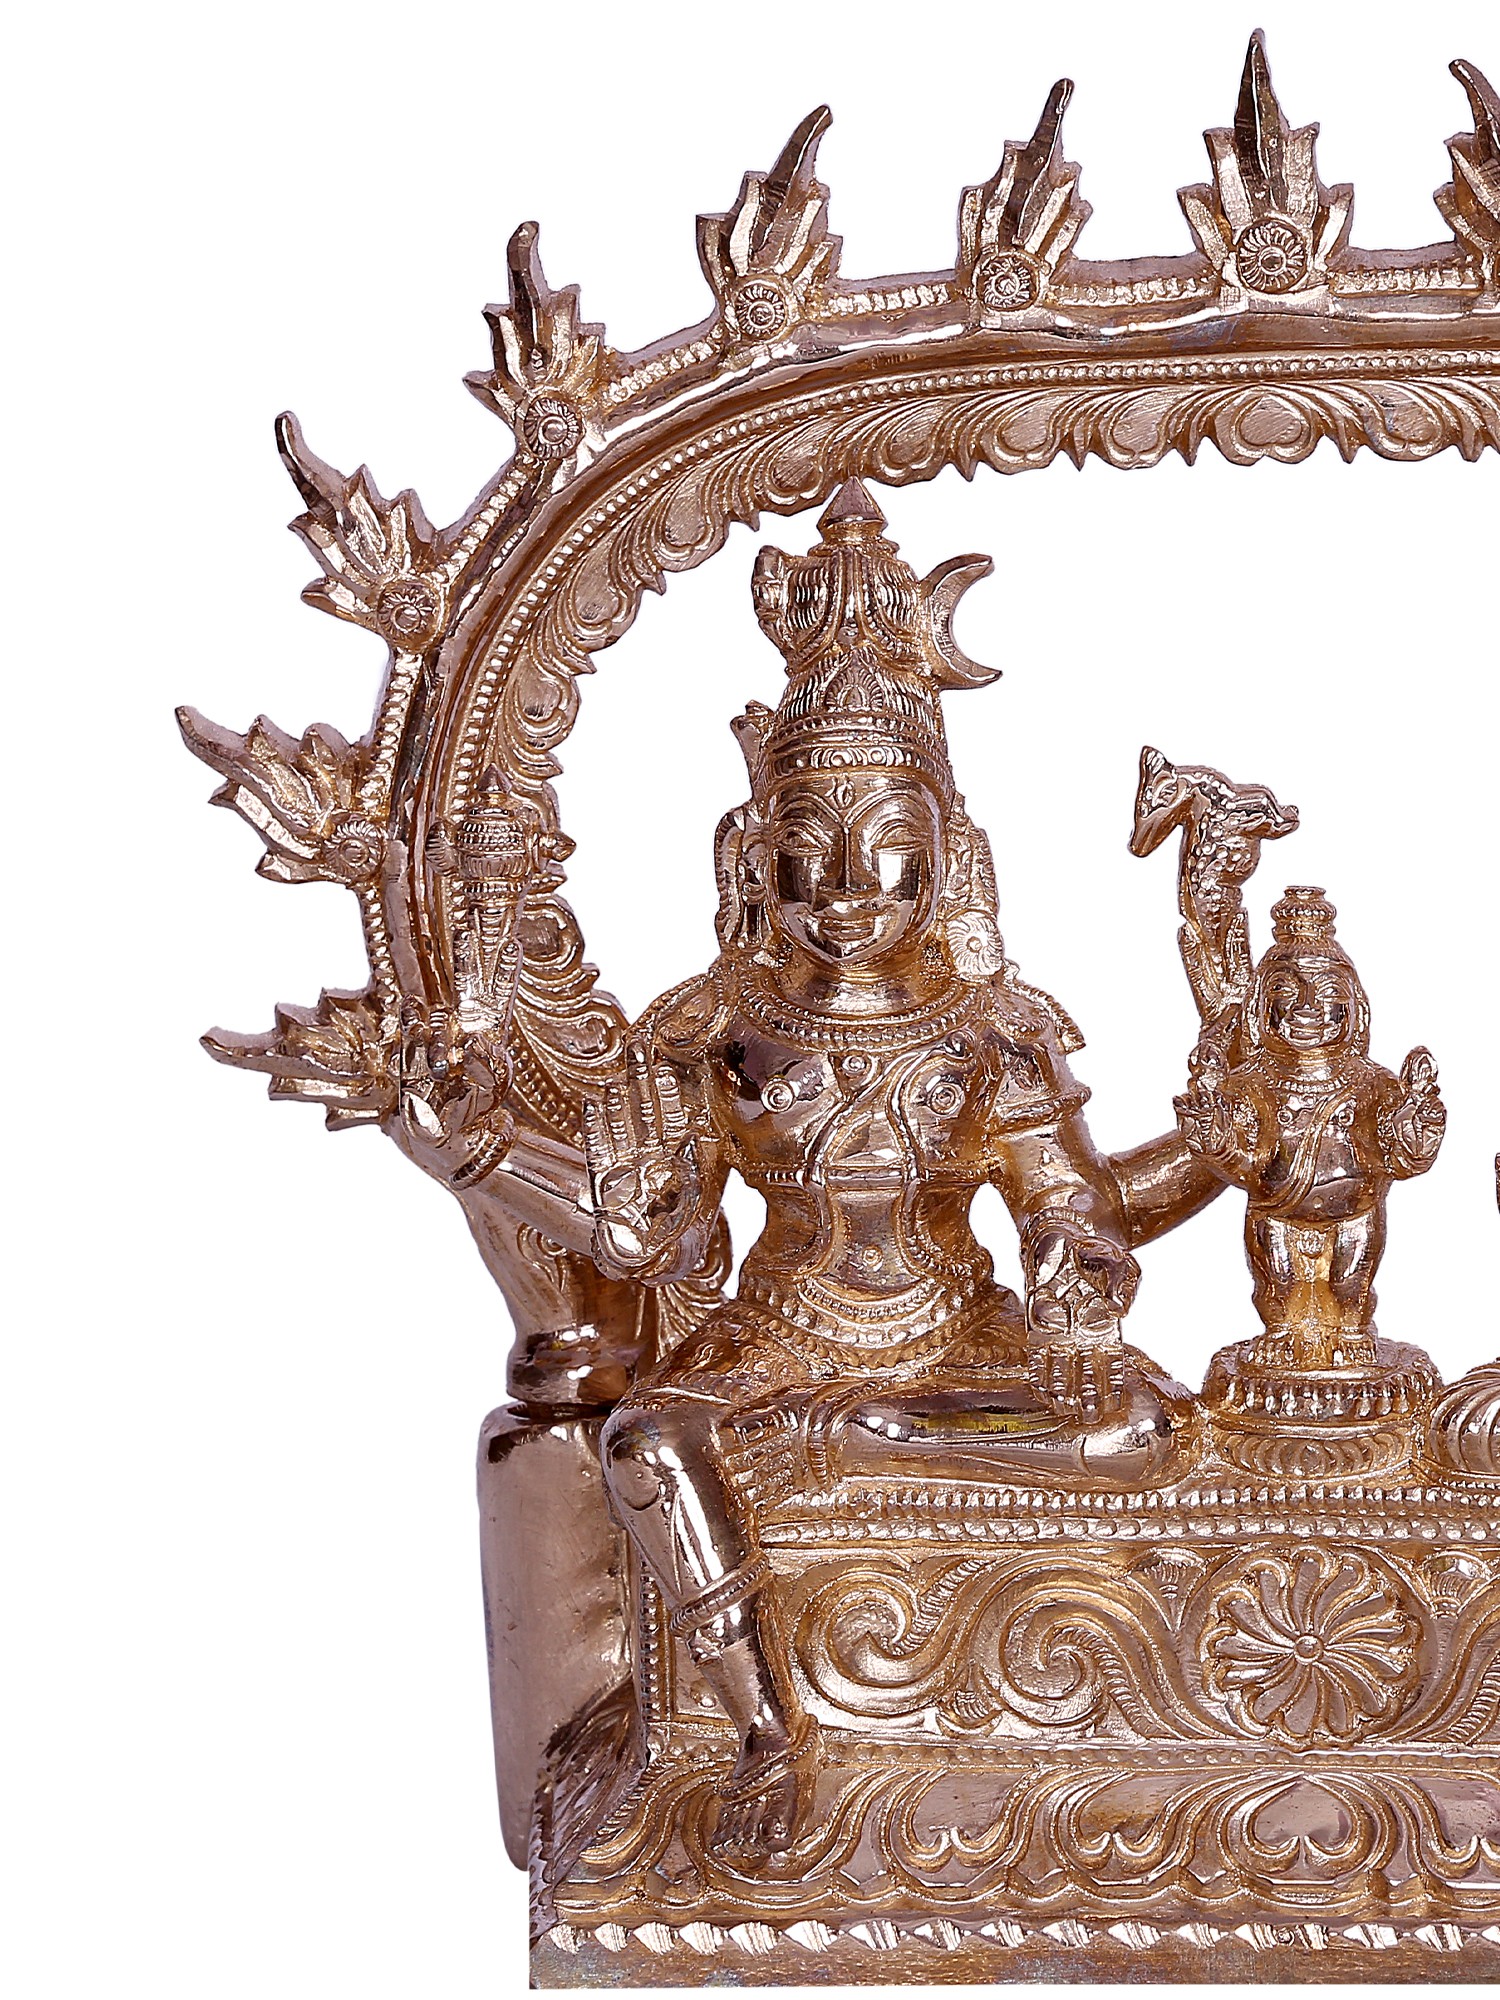 Small Lord Shiva And Parvati Seated On Throne Exotic India Art